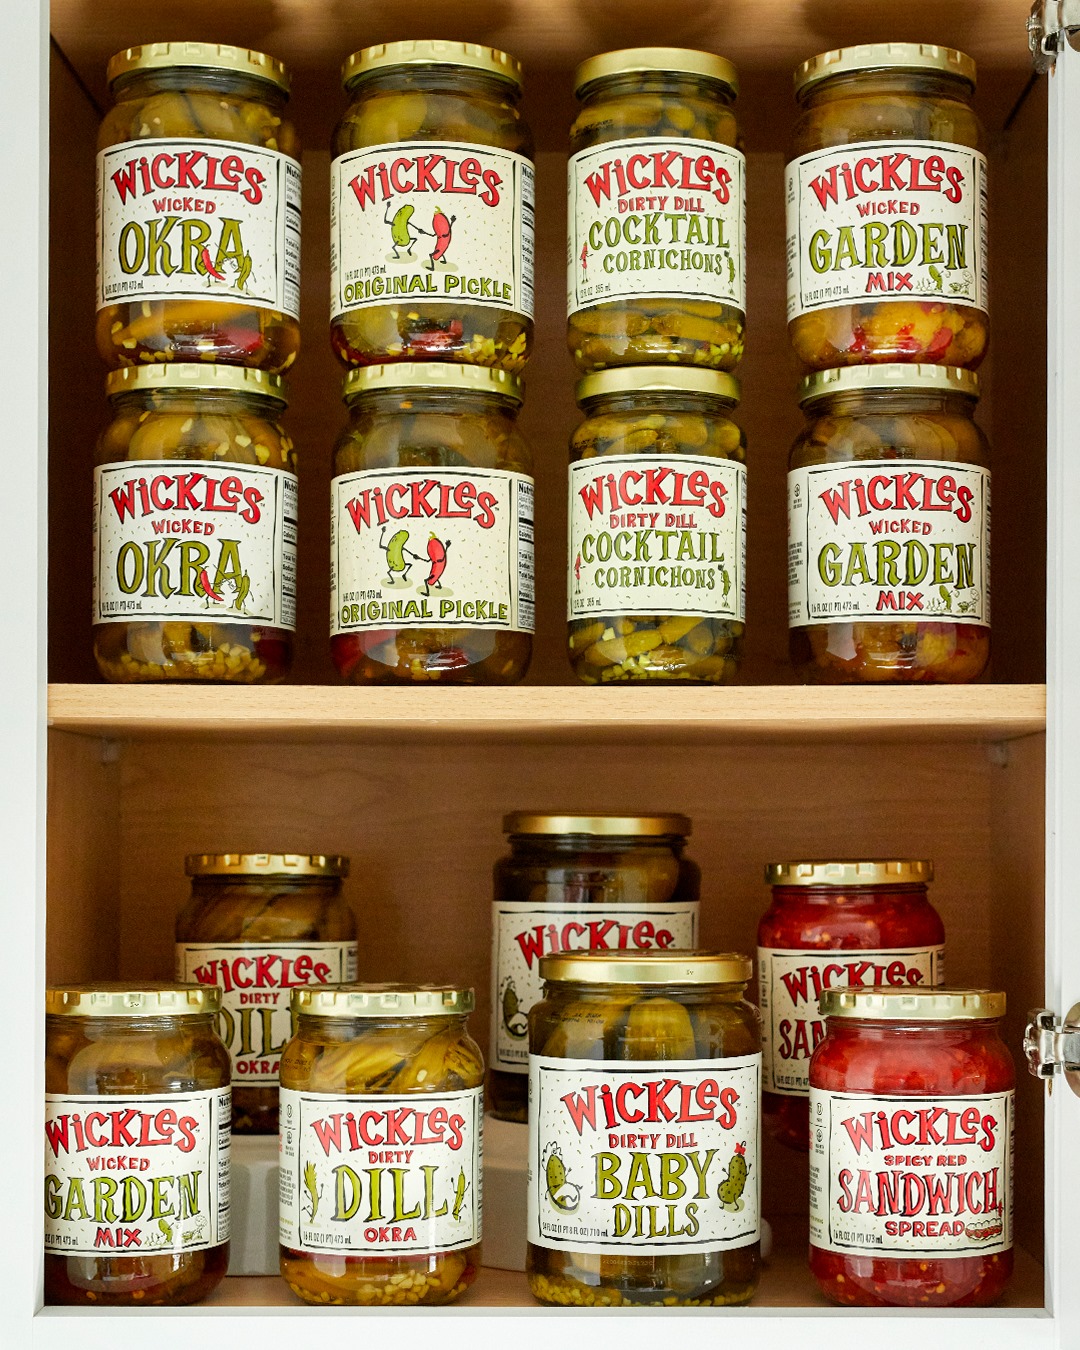 Alabama's Wickles Pickles acquired by Fenwick Food Group - Alabama